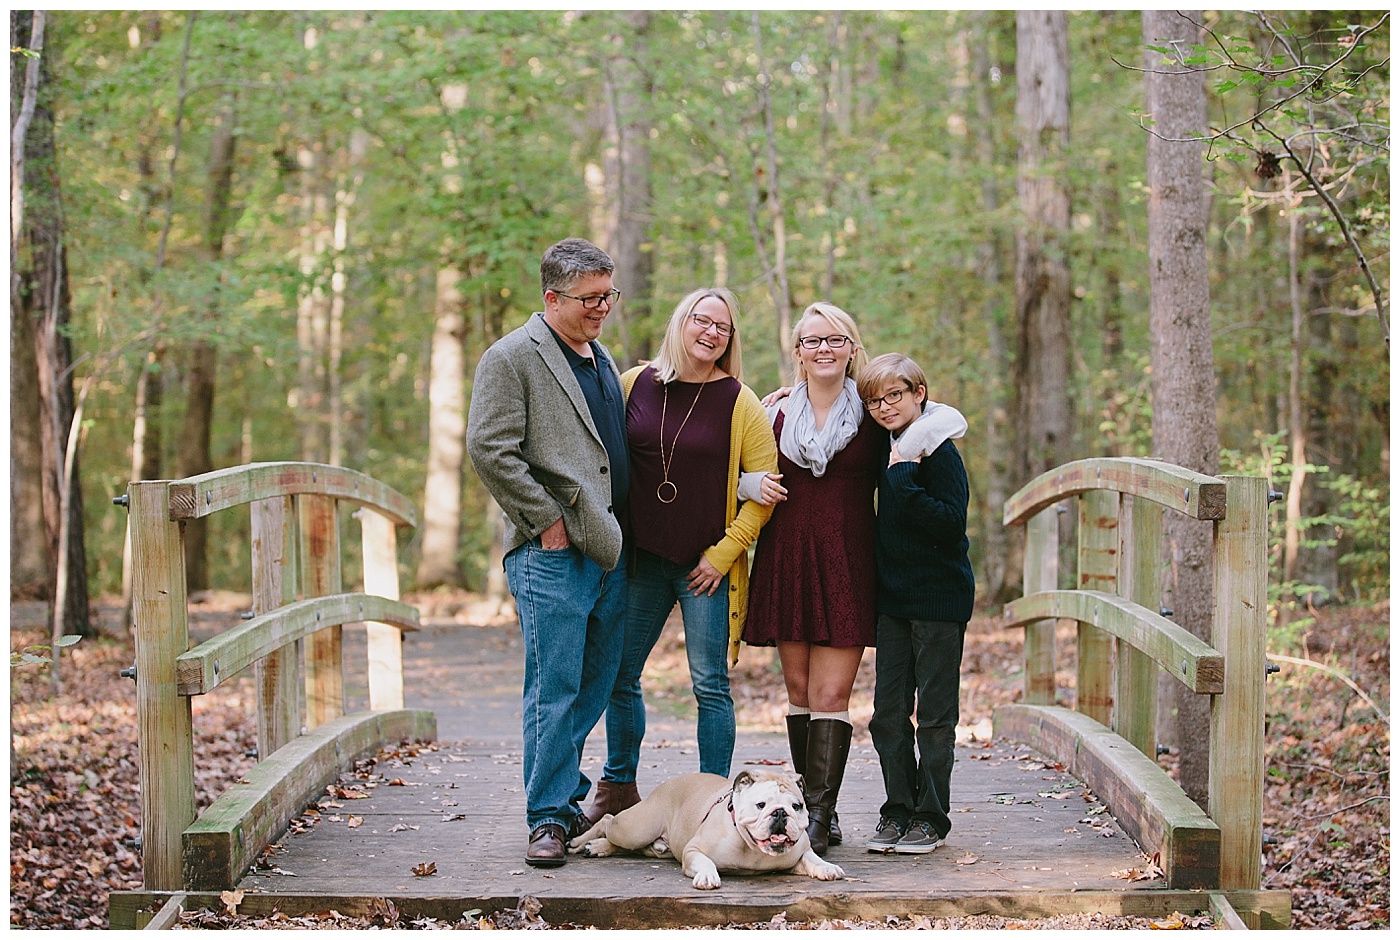 The Skaggs Family | Family Portrait Photography